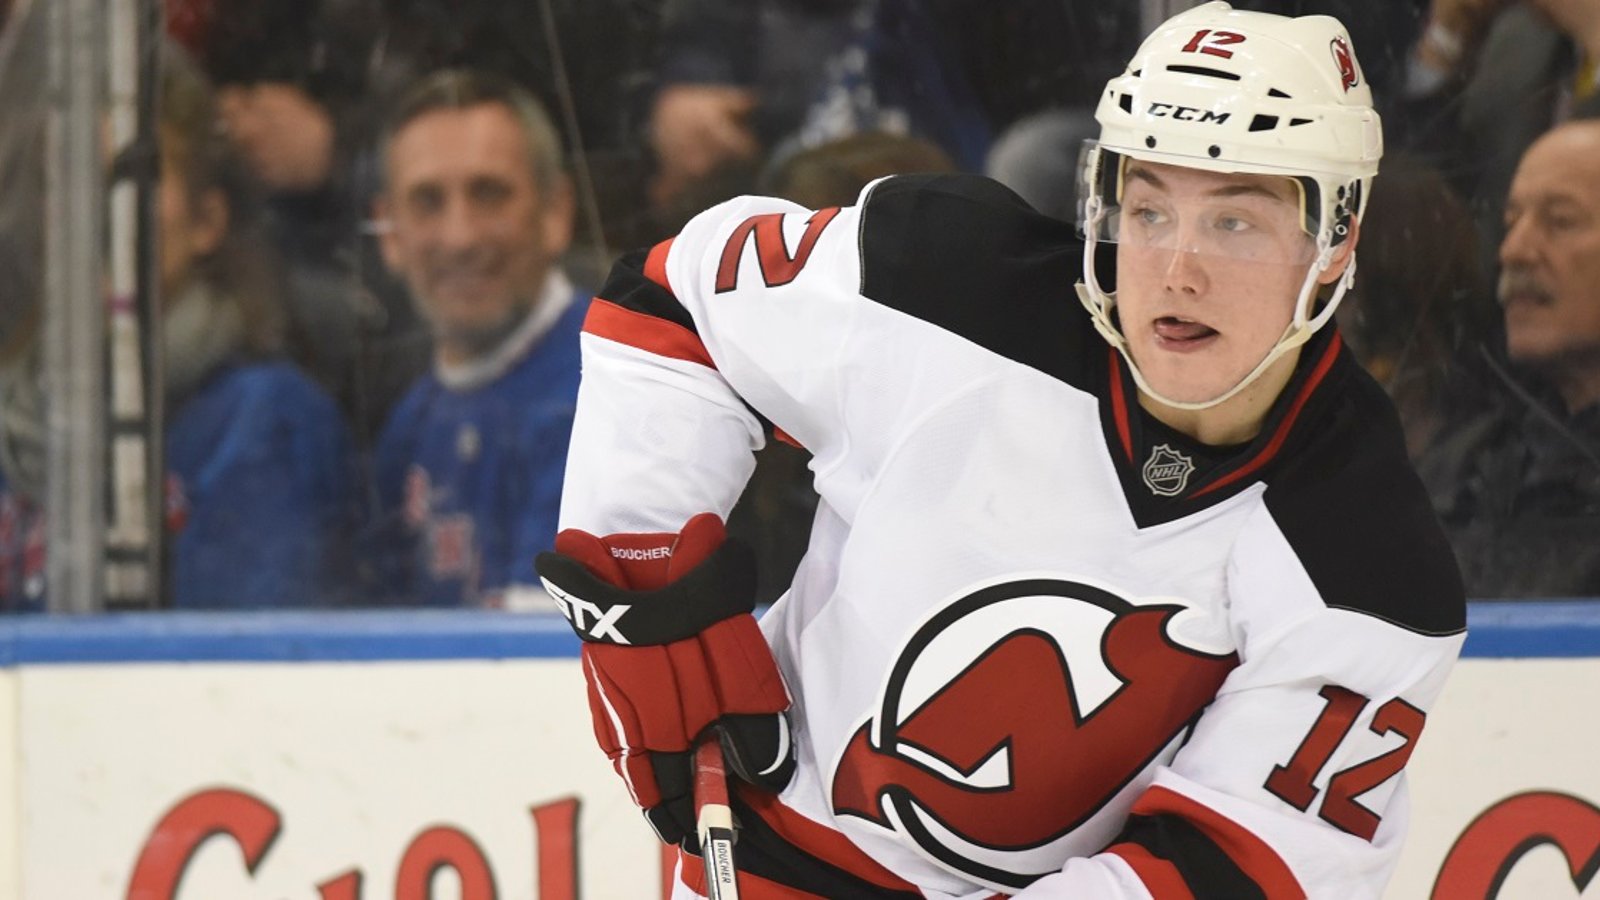 The return of Taylor Hall forces the Devils to put young forward on waivers.